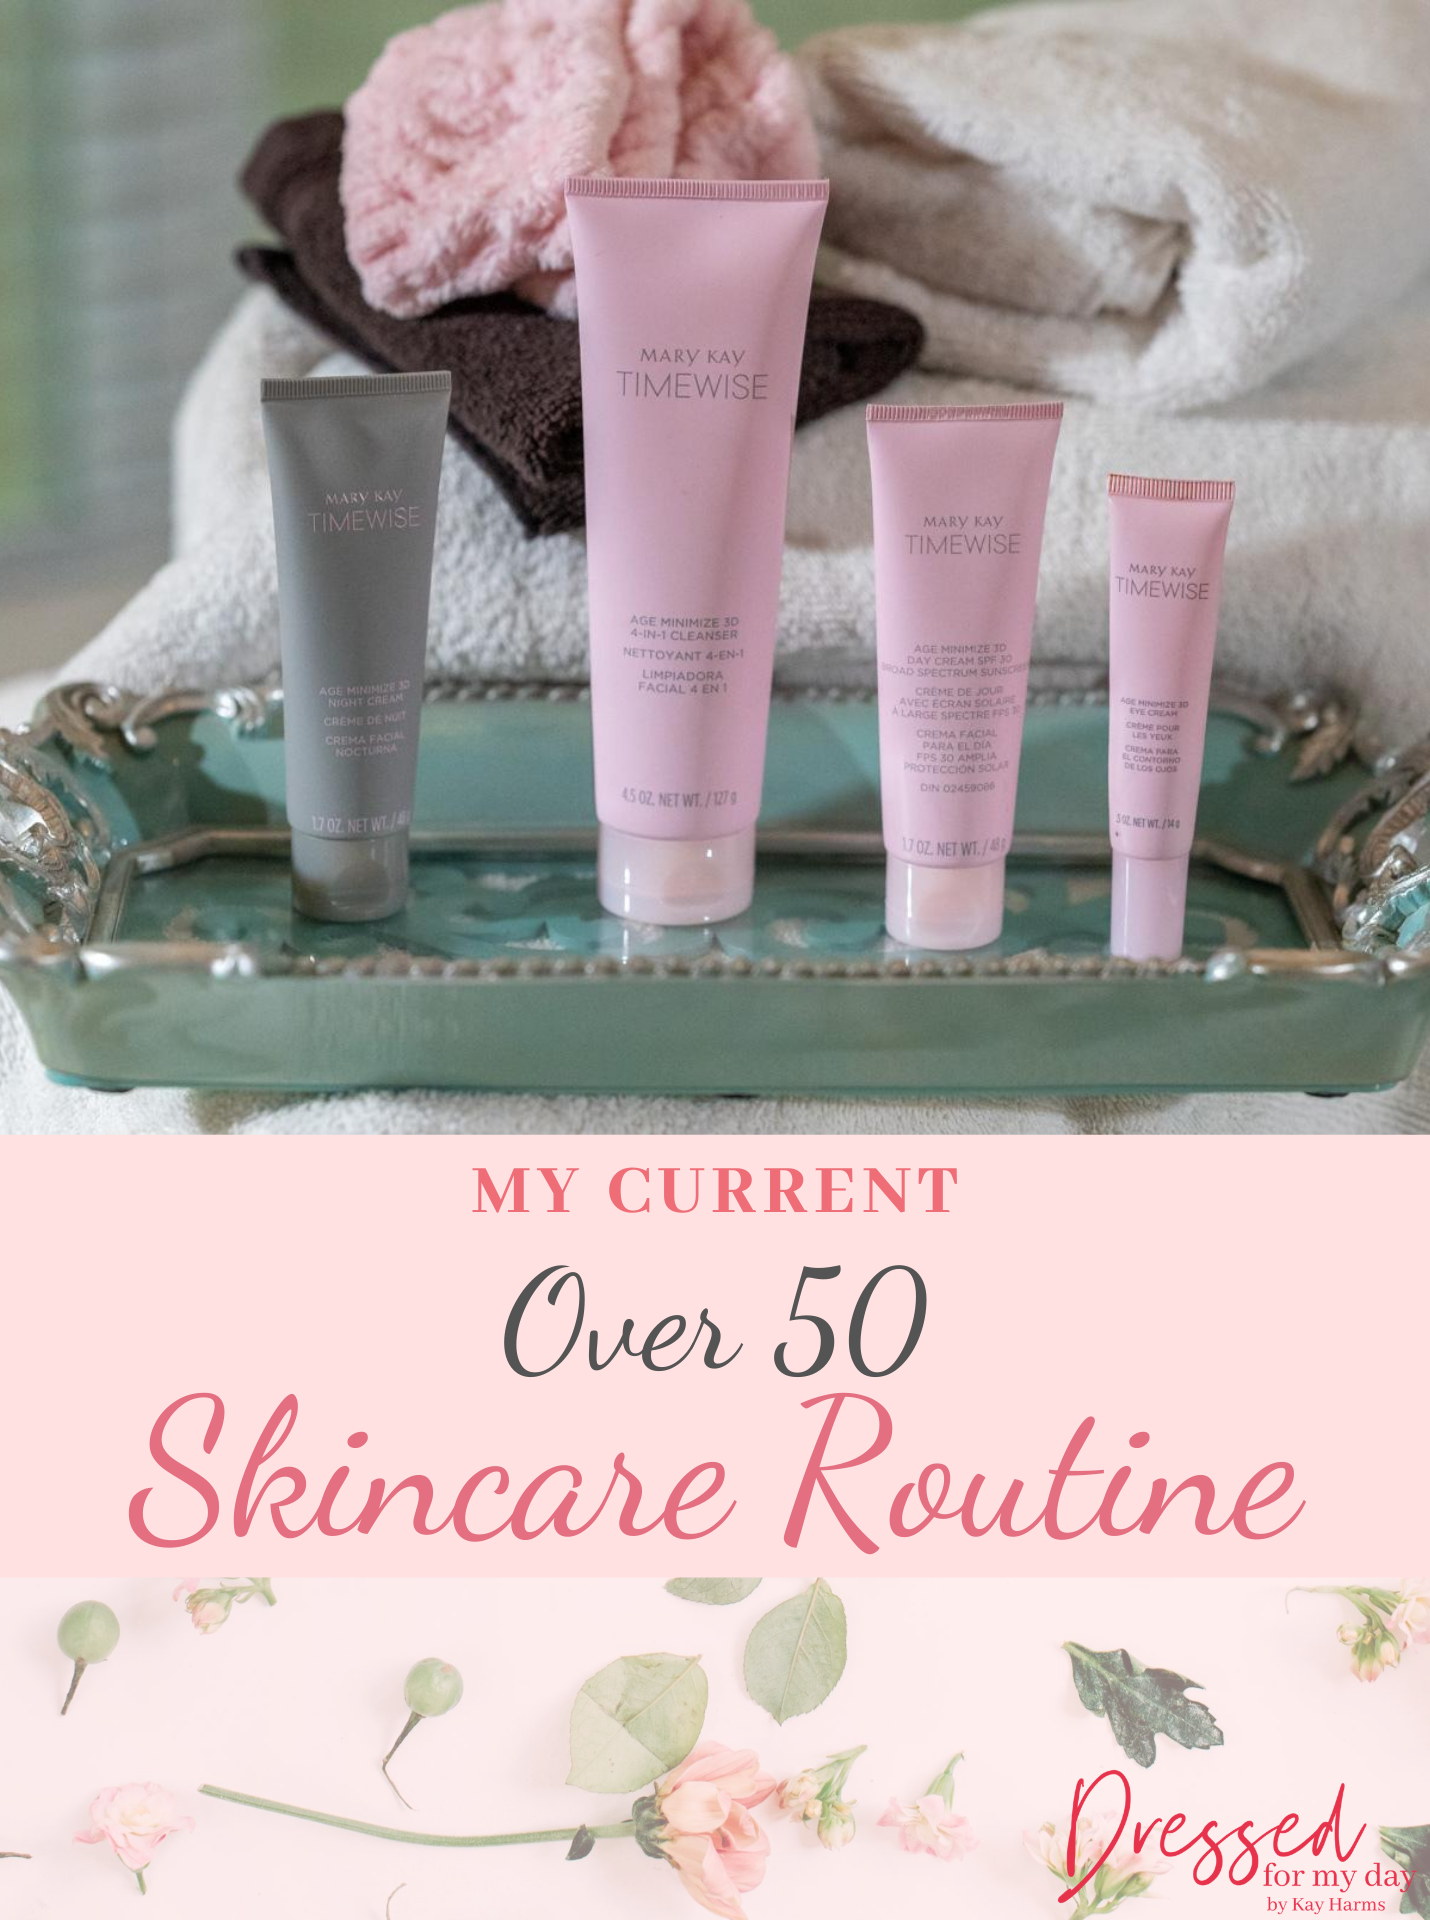 My Current Over 50 Skincare Routine - Dressed for My Day